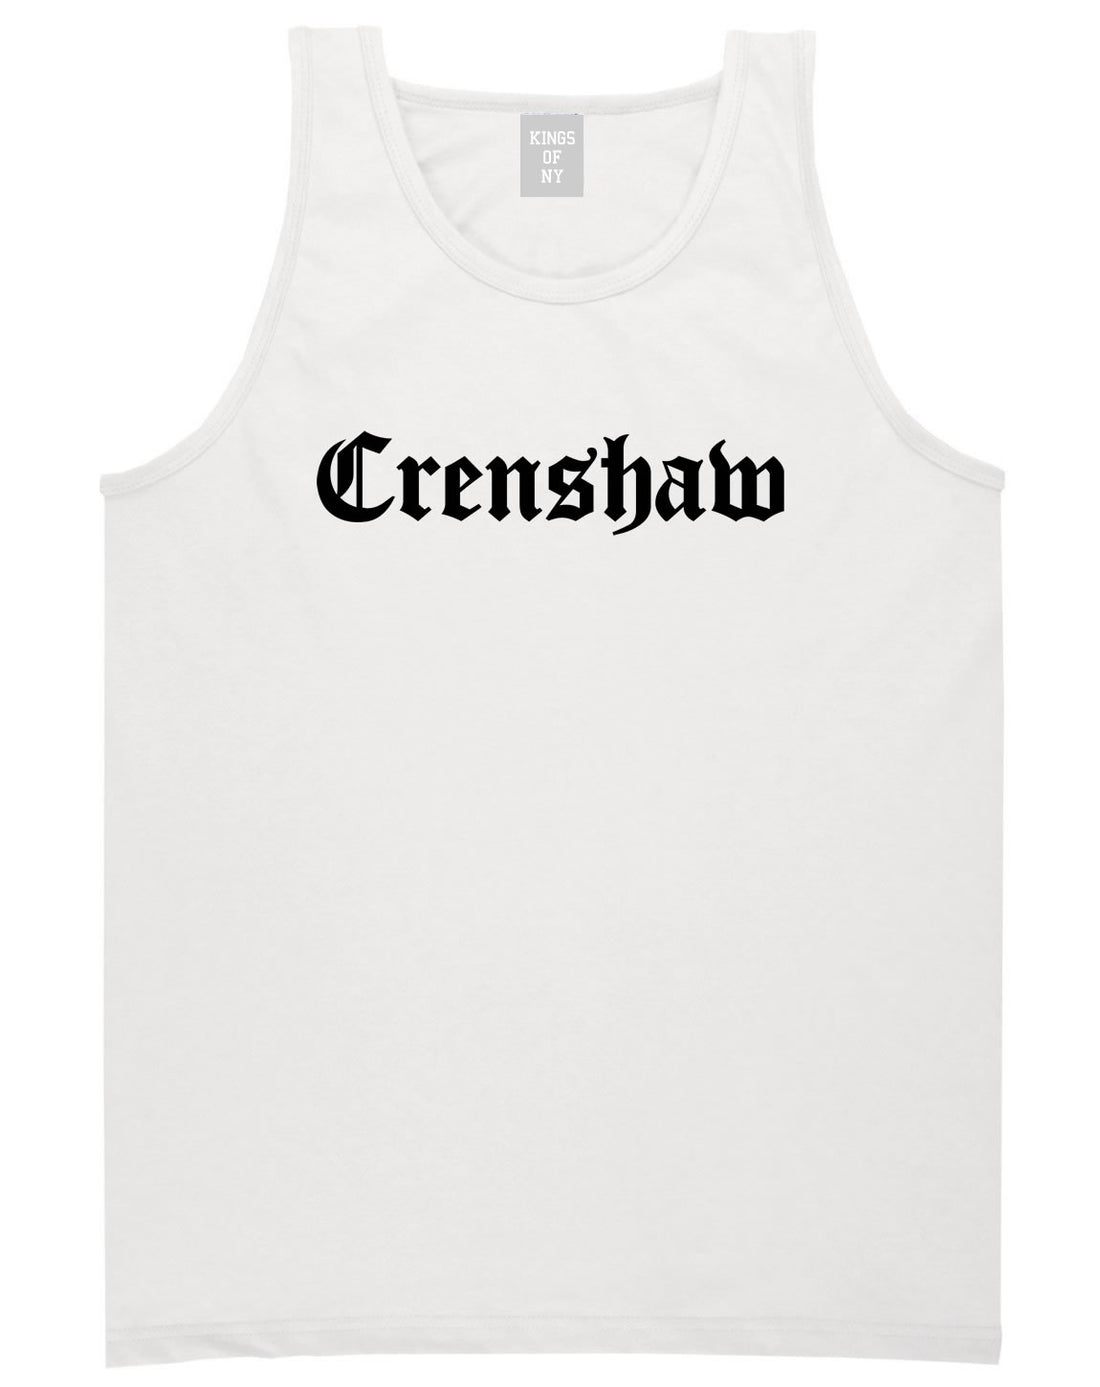 Crenshaw Old English California Tank Top in White By Kings Of NY